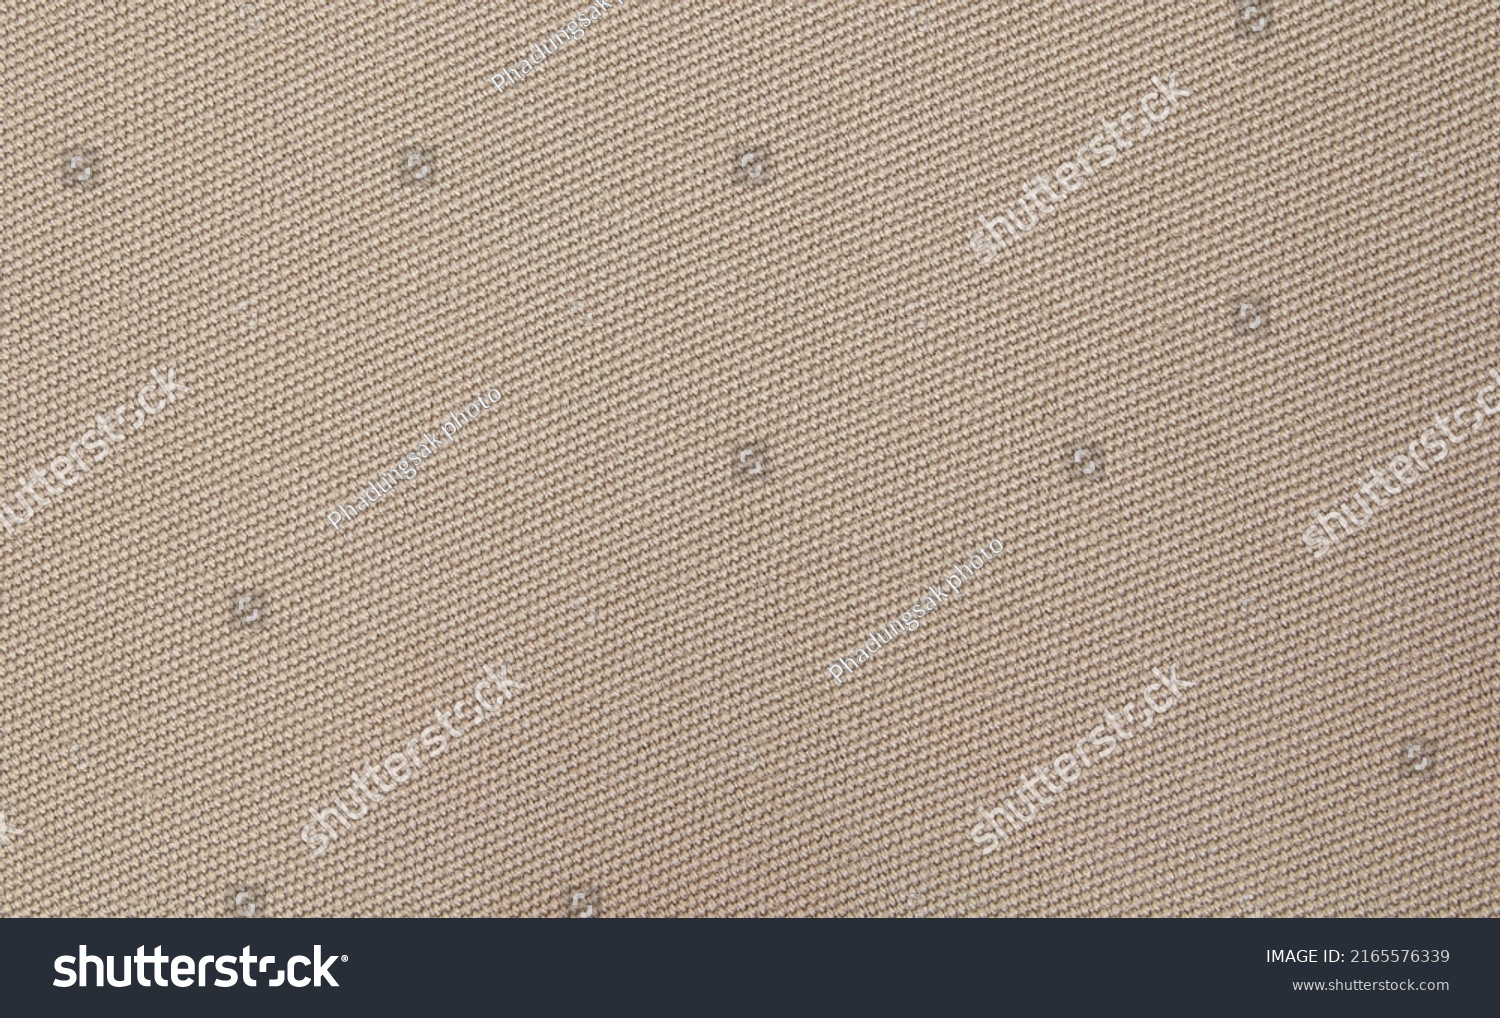 Background texture of coarse woven brown fabric. #2165576339